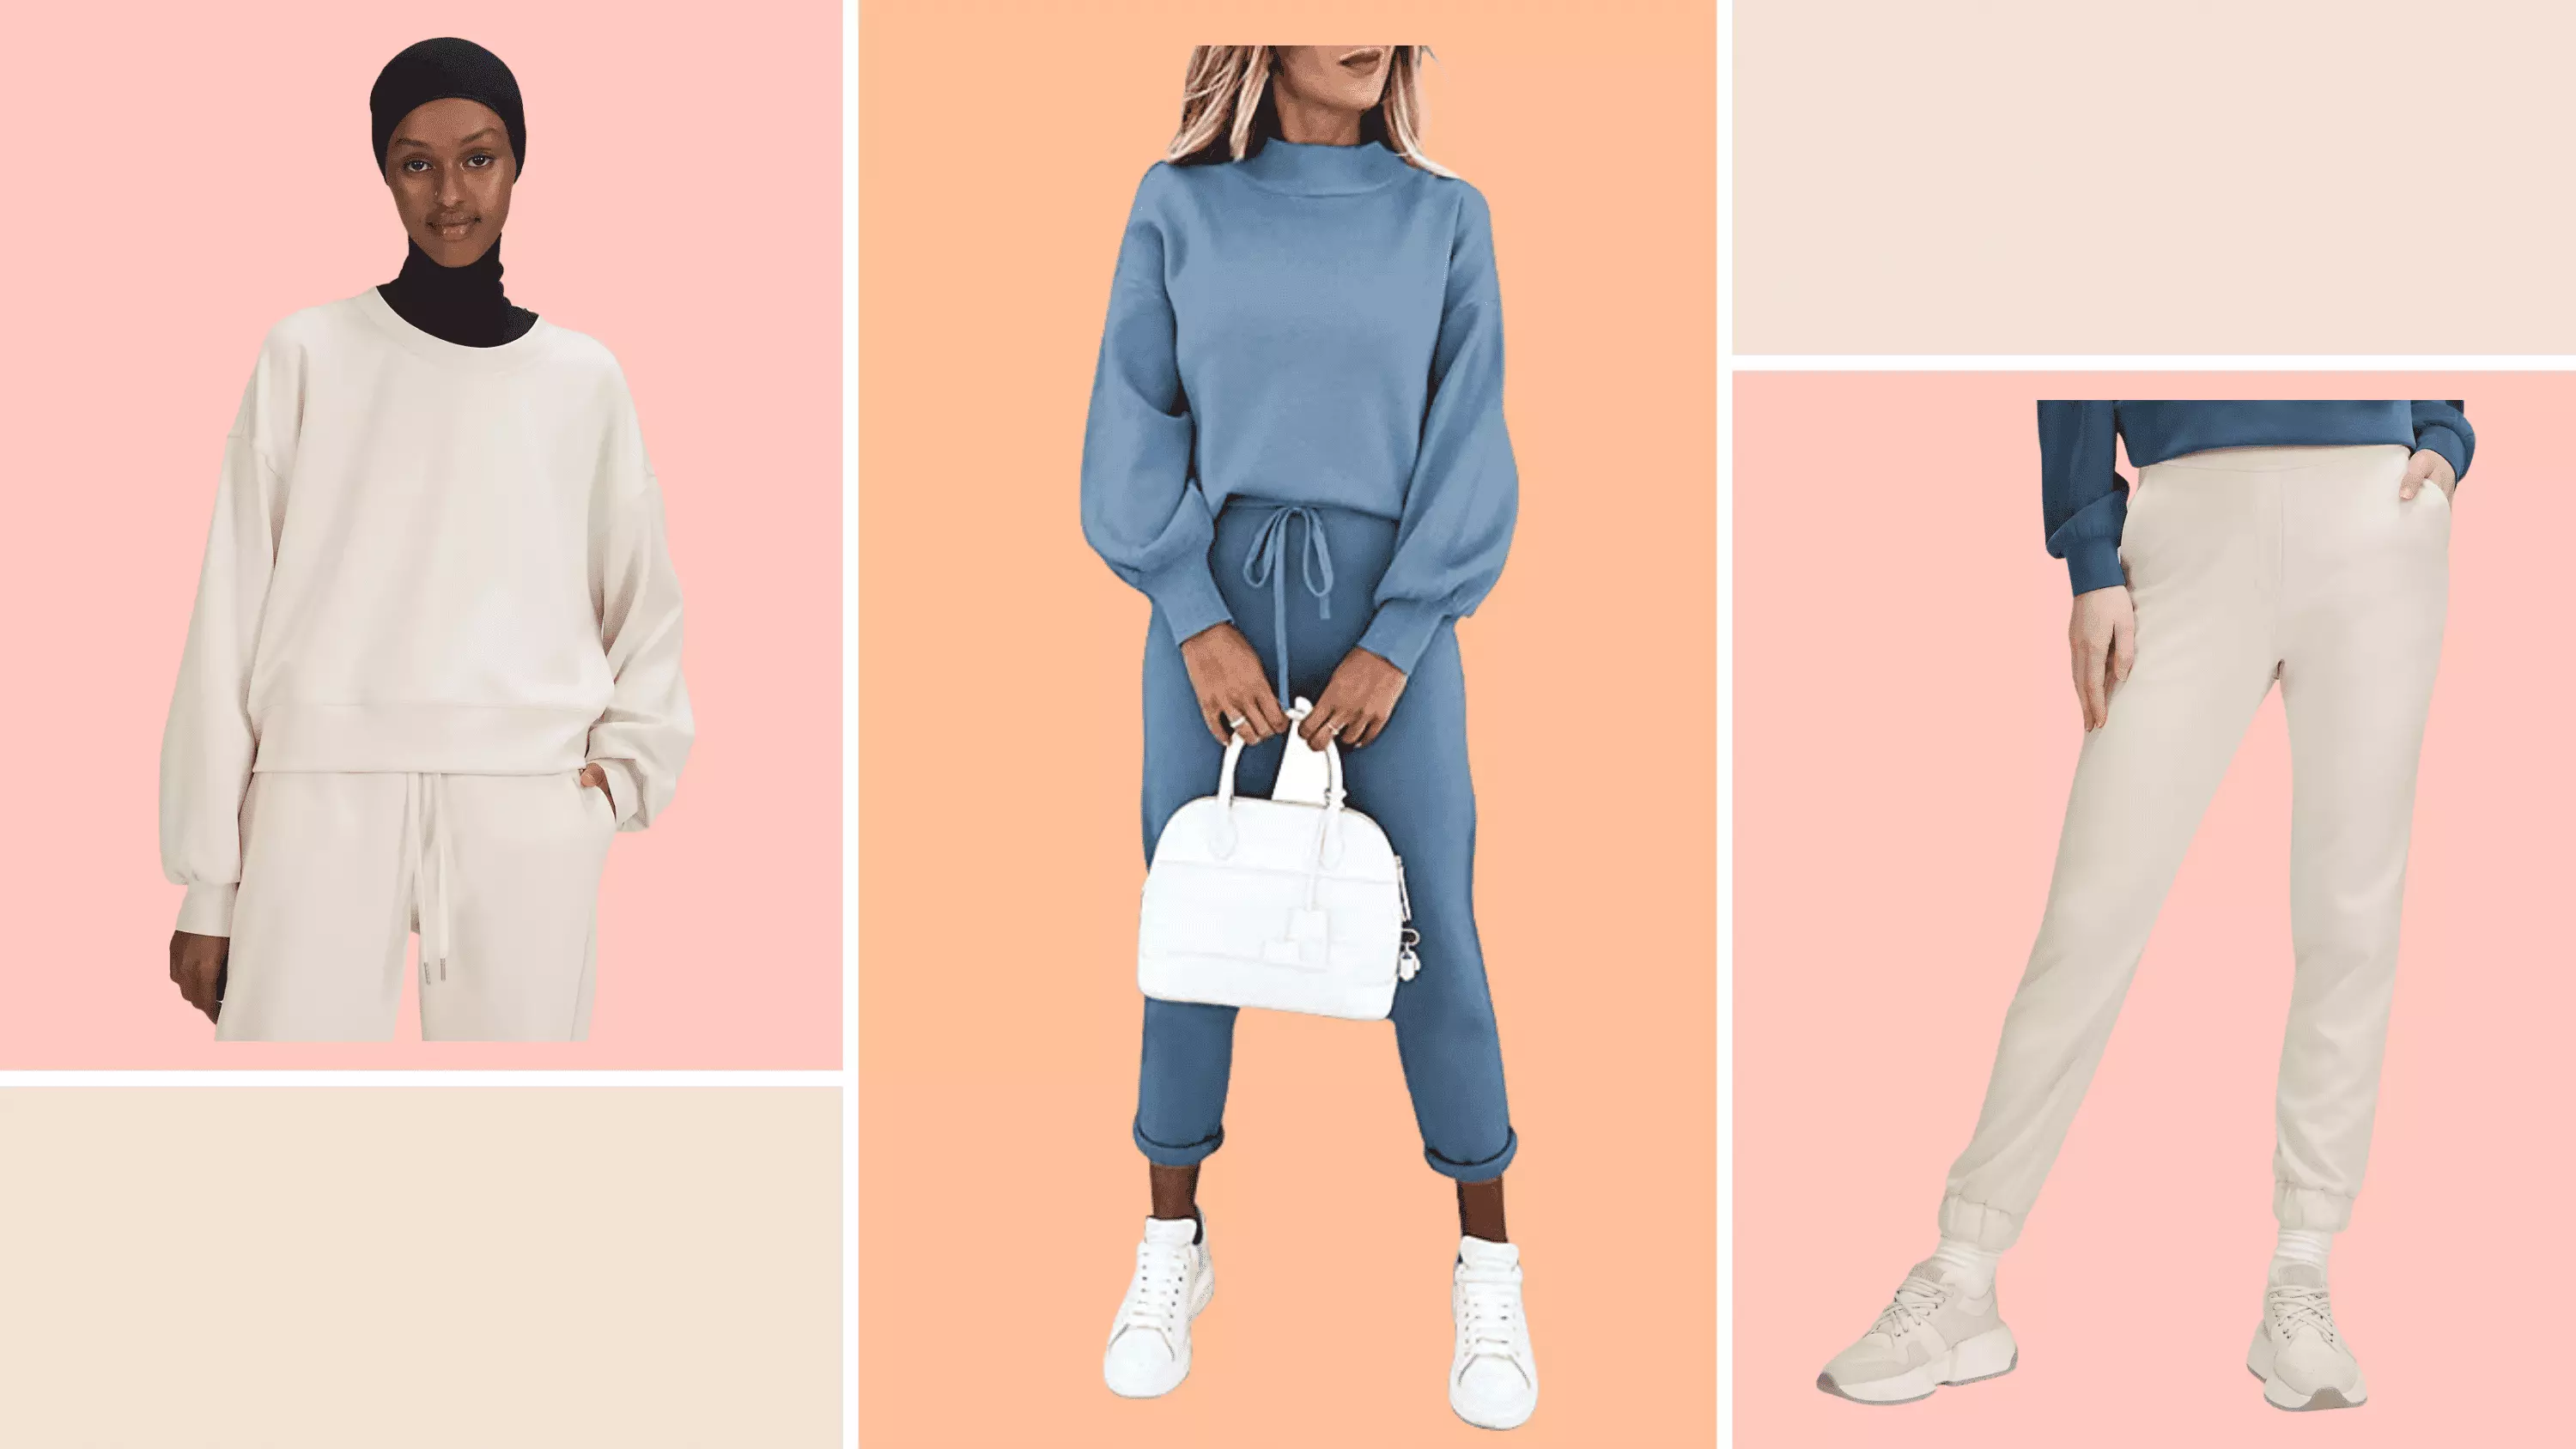 Matching athleisure sets are the perfect no-fuss option when you need comfort.